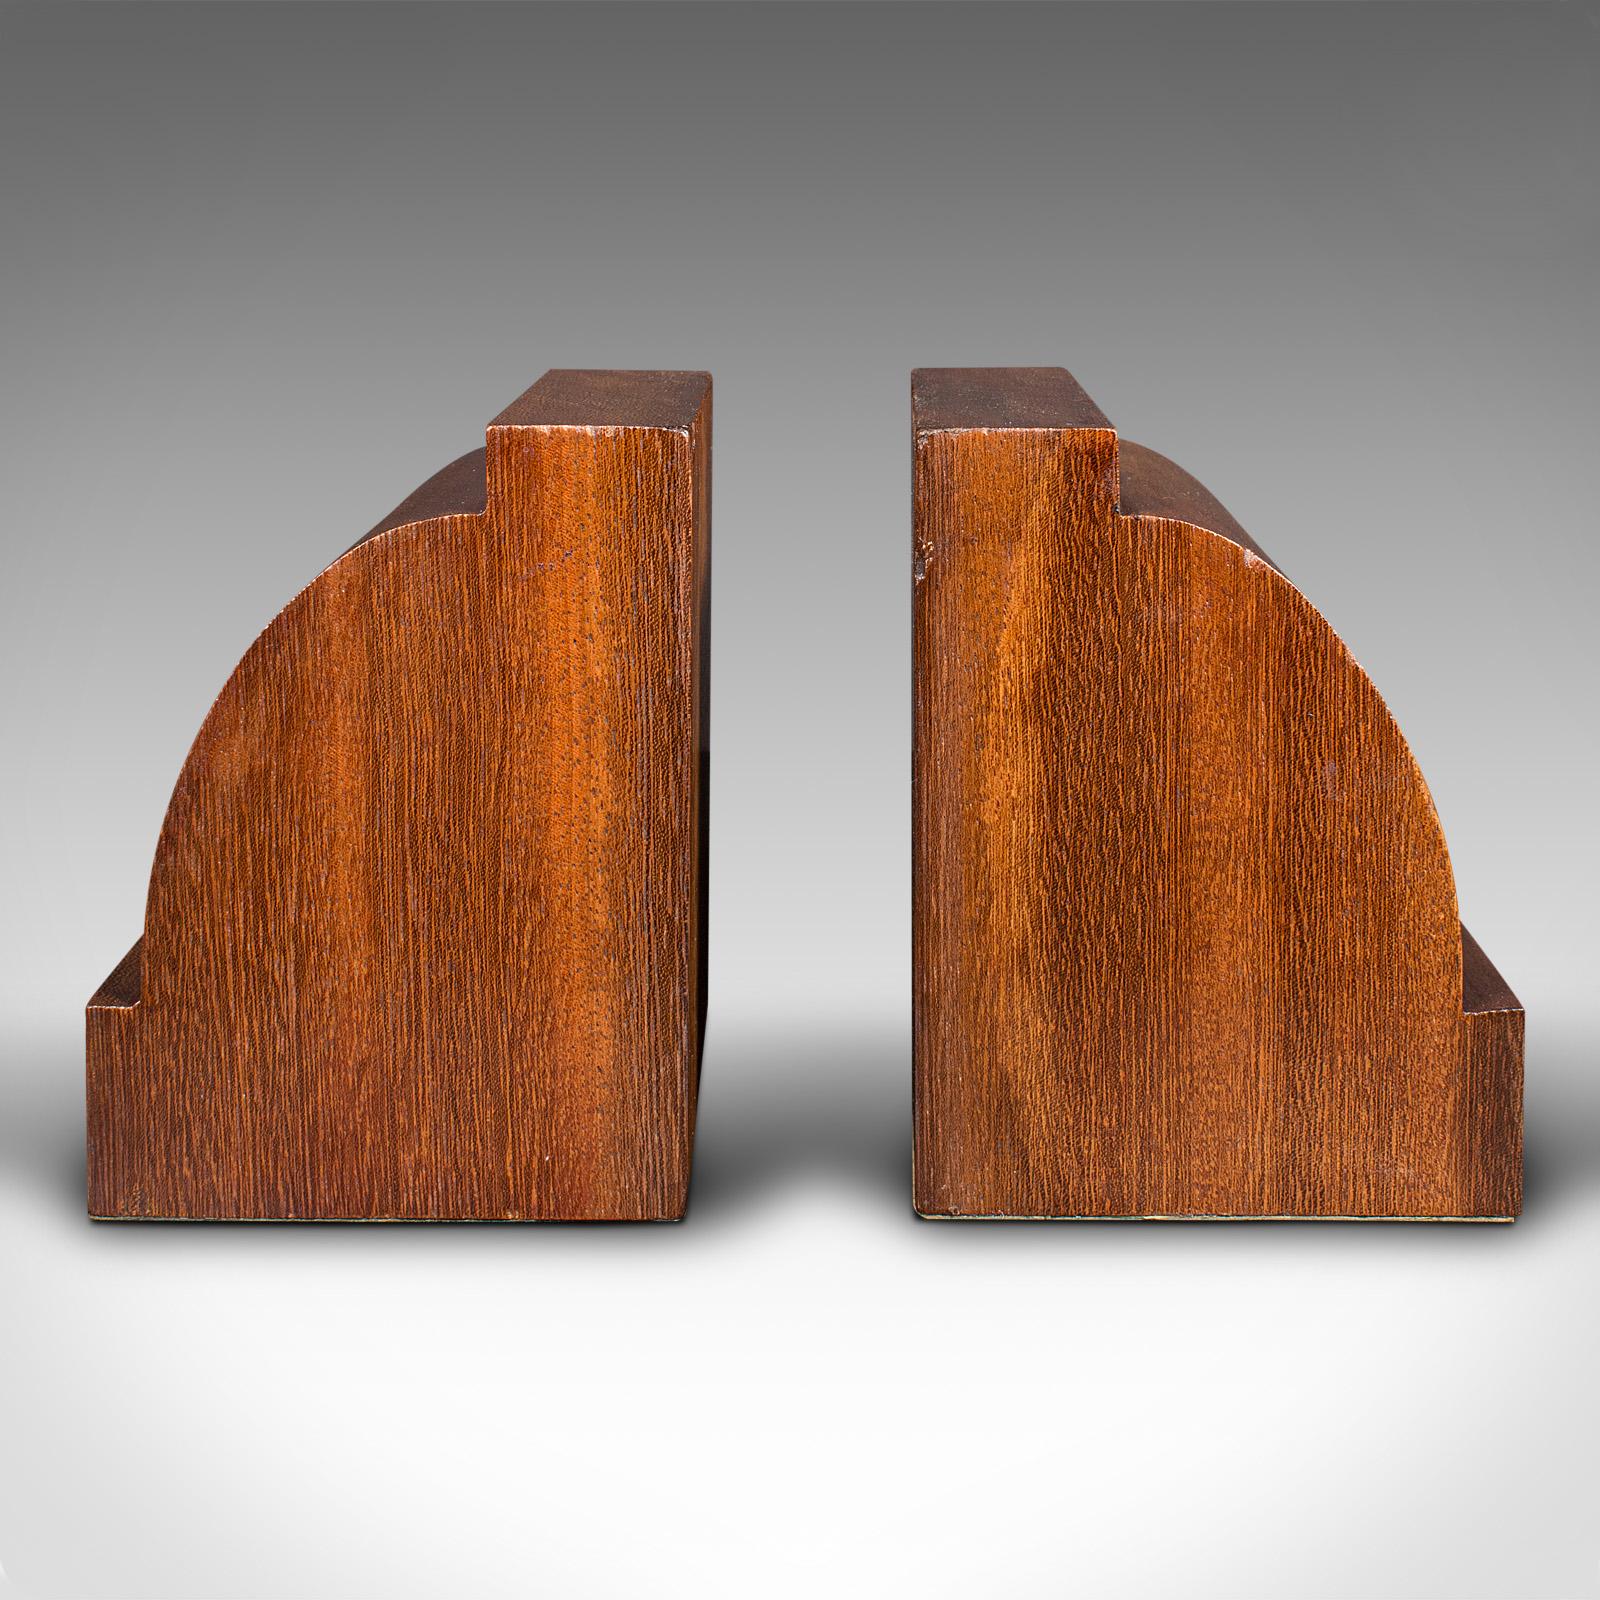 This is a pair of executive desk bookends. An English, solid mahogany and leather dressed book rest, dating to the Edwardian period, circa 1910.

Distinctive form and of appealing weight, ideal for the desktop or reading nook
Displaying a desirable